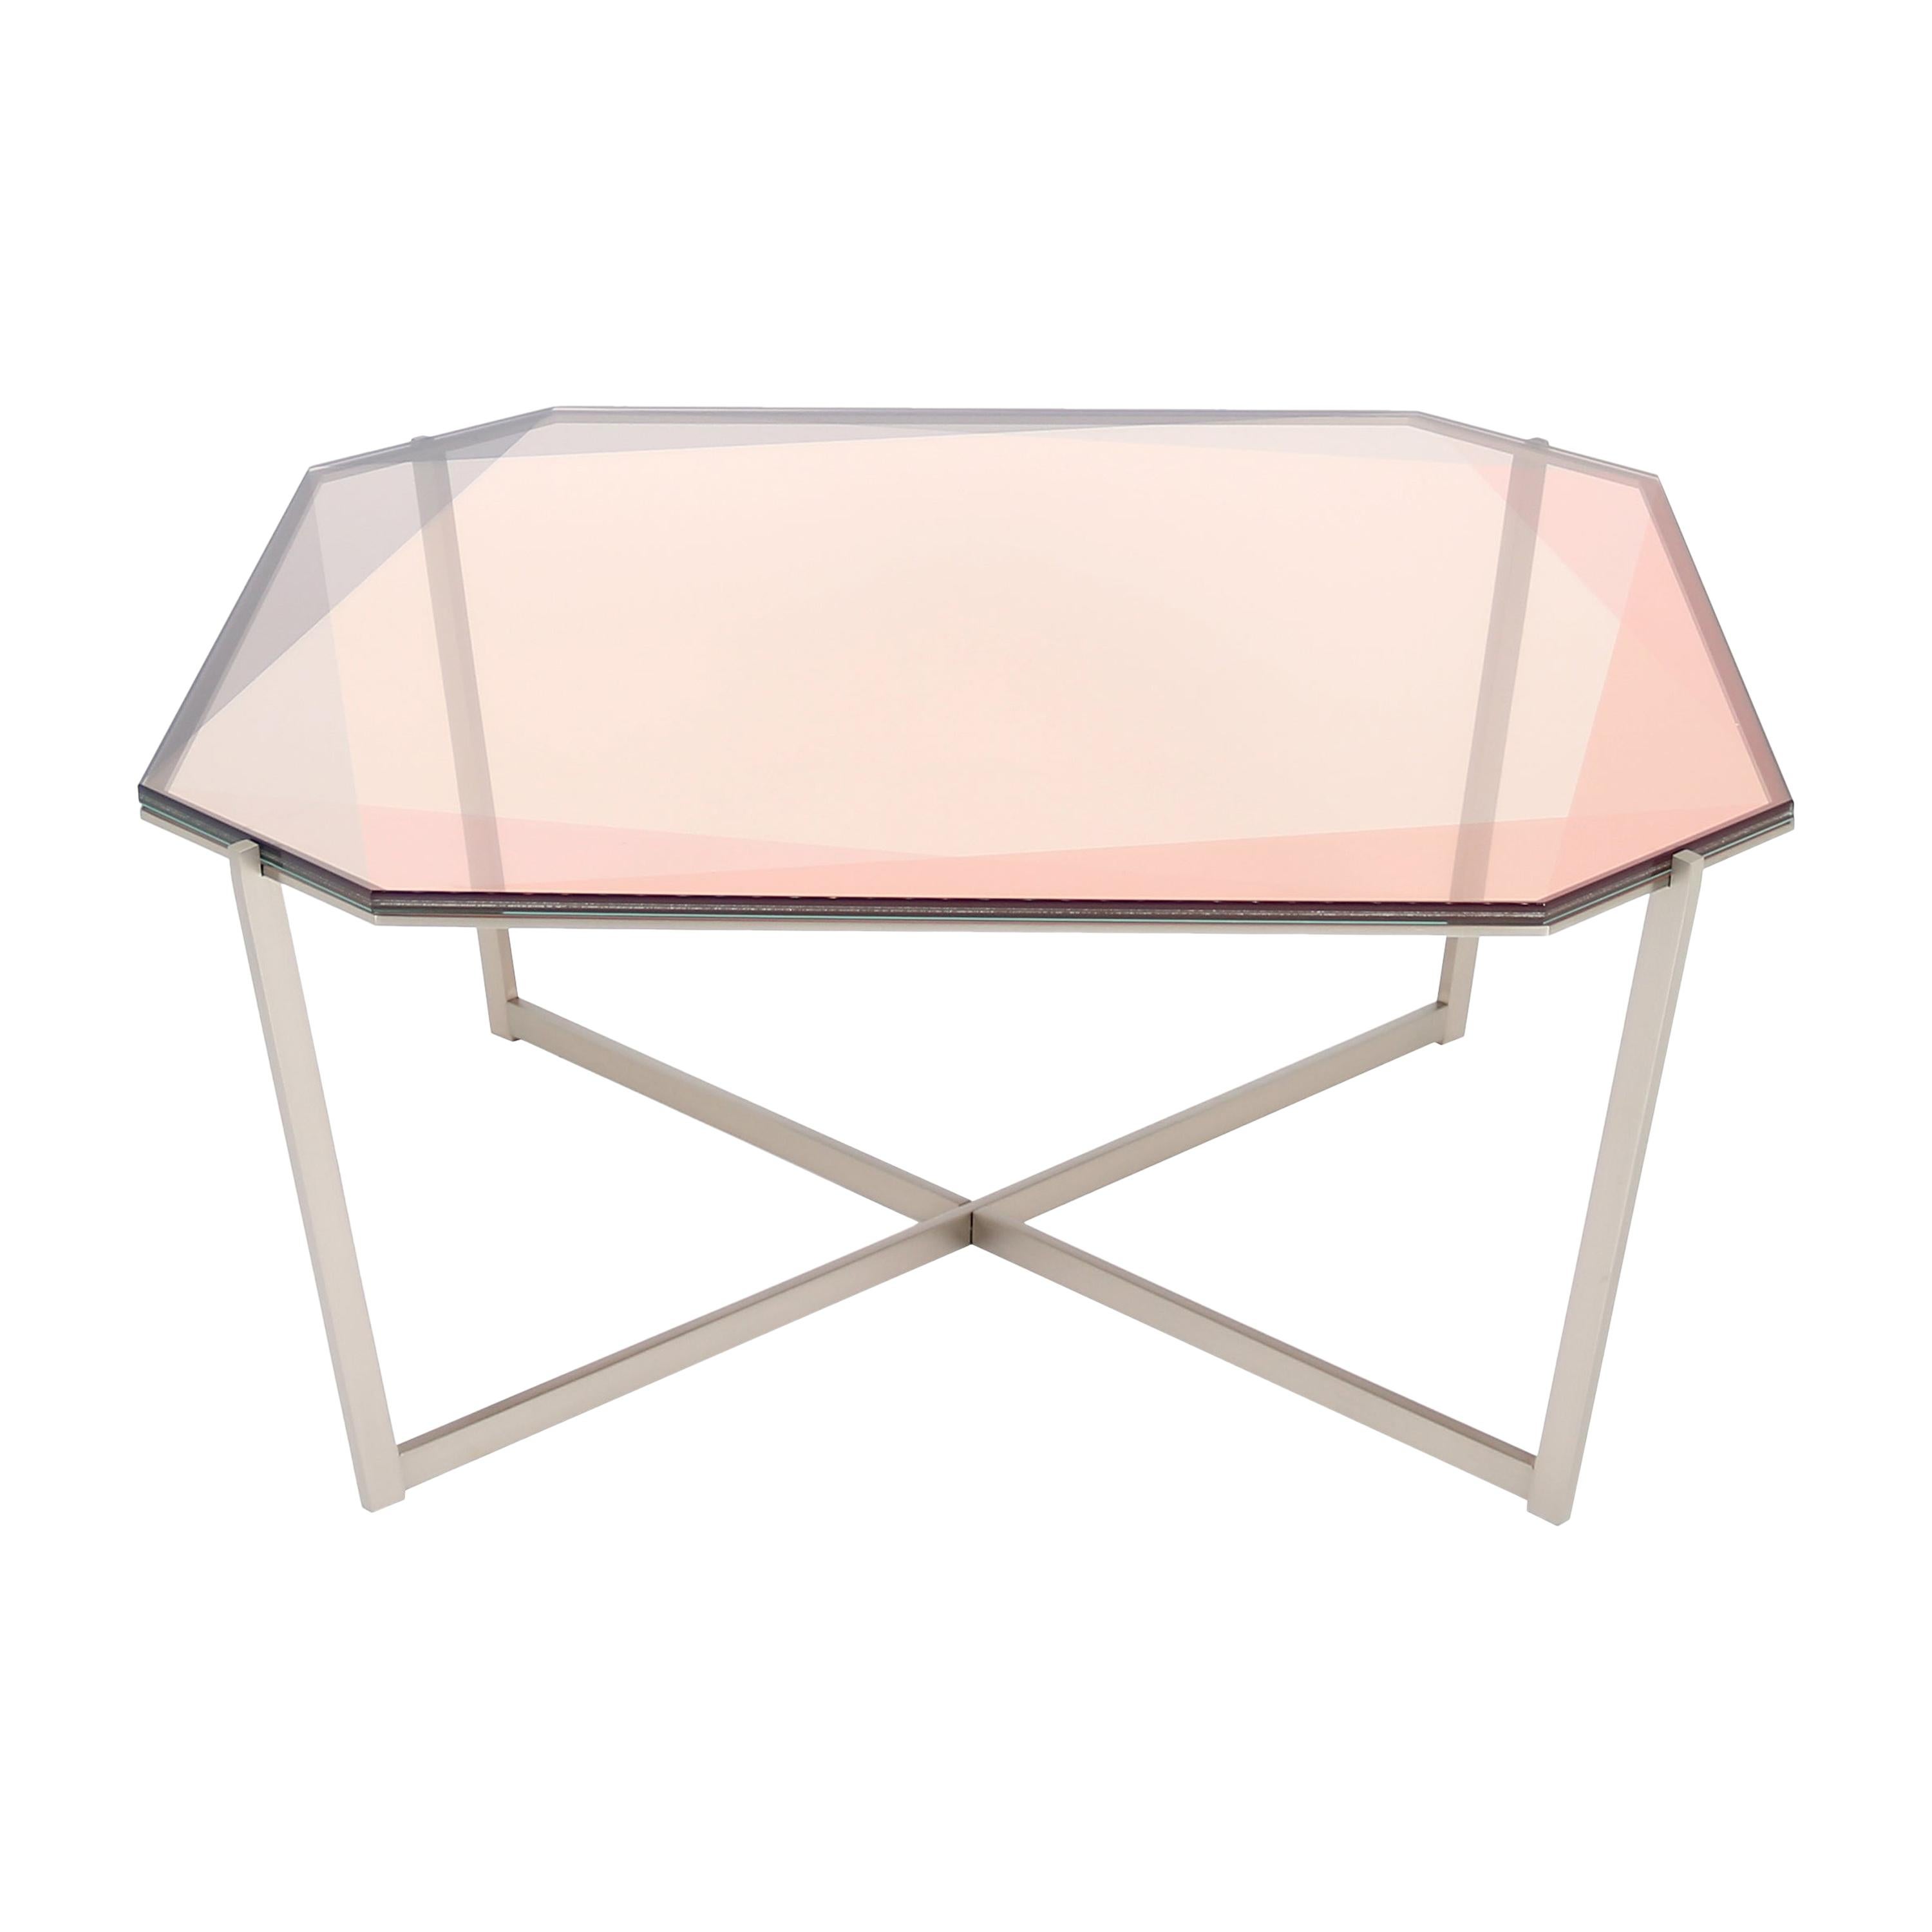 Gem Square Coffee Table-Blush Glass with Stainless Steel Base by Debra Folz For Sale